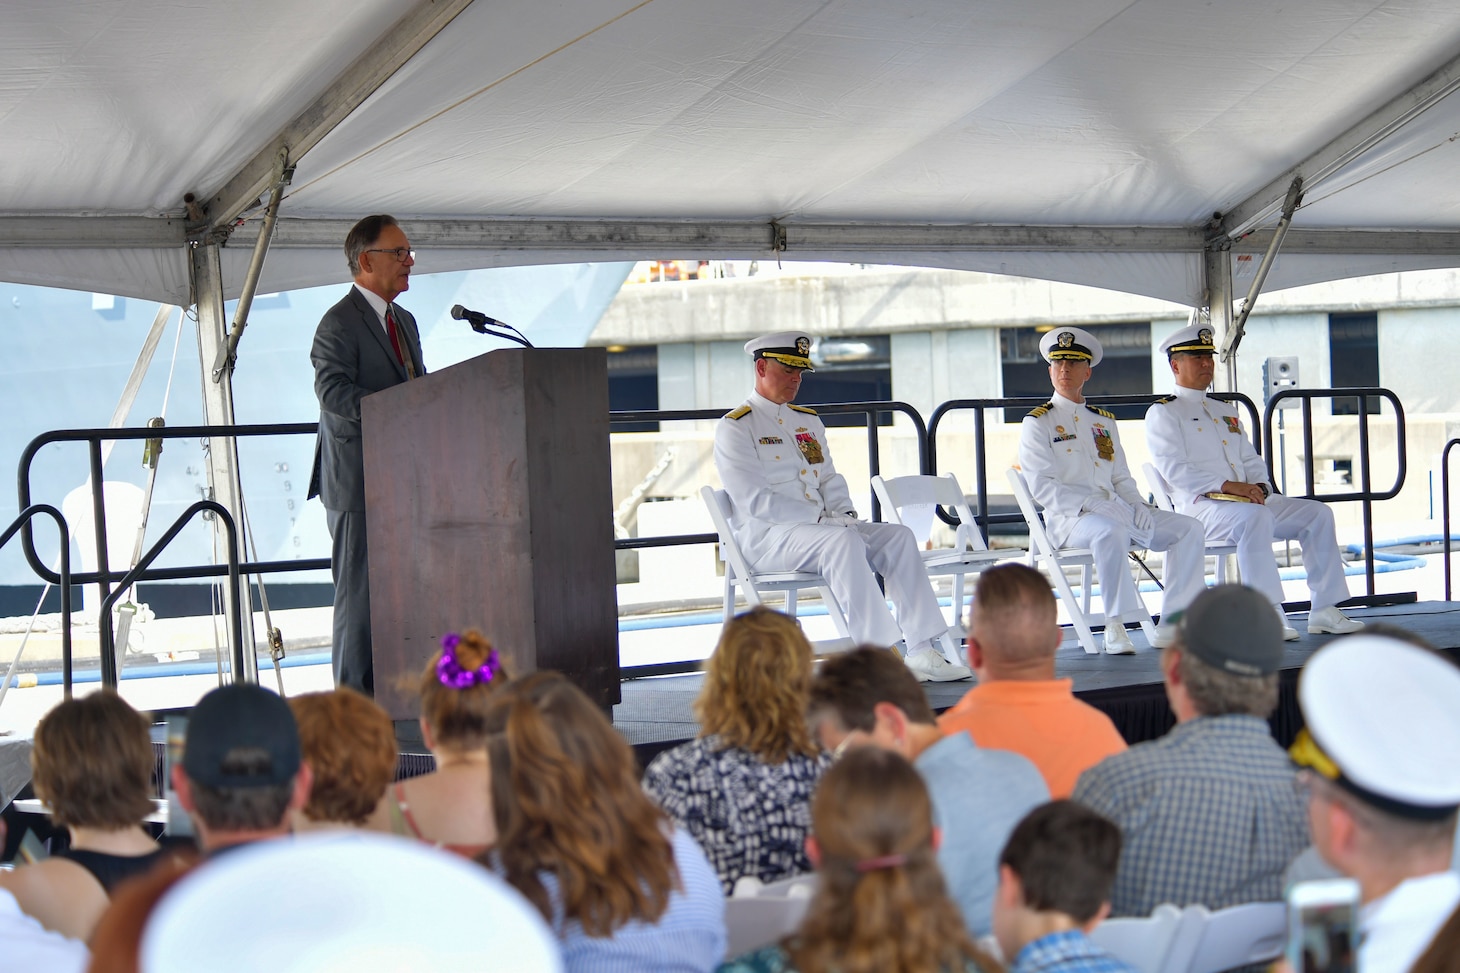 NAVAL STATION NORFOLK (Aug. 4, 2022) Capt. (ret.) Constantine L. Xefteris, the first commanding officer of the guided-missile cruiser USS Vella Gulf (CG 72), speaks during the ship’s decommissioning ceremony, Aug. 4, 2022. Vella Gulf was commissioned on Sept. 18, 1993 at Naval Station Norfolk. Vella Gulf is the first of five cruisers set to be decommissioned this year. (U.S. Navy photo by Mass Communication Specialist 1st Class Jacob Milham)